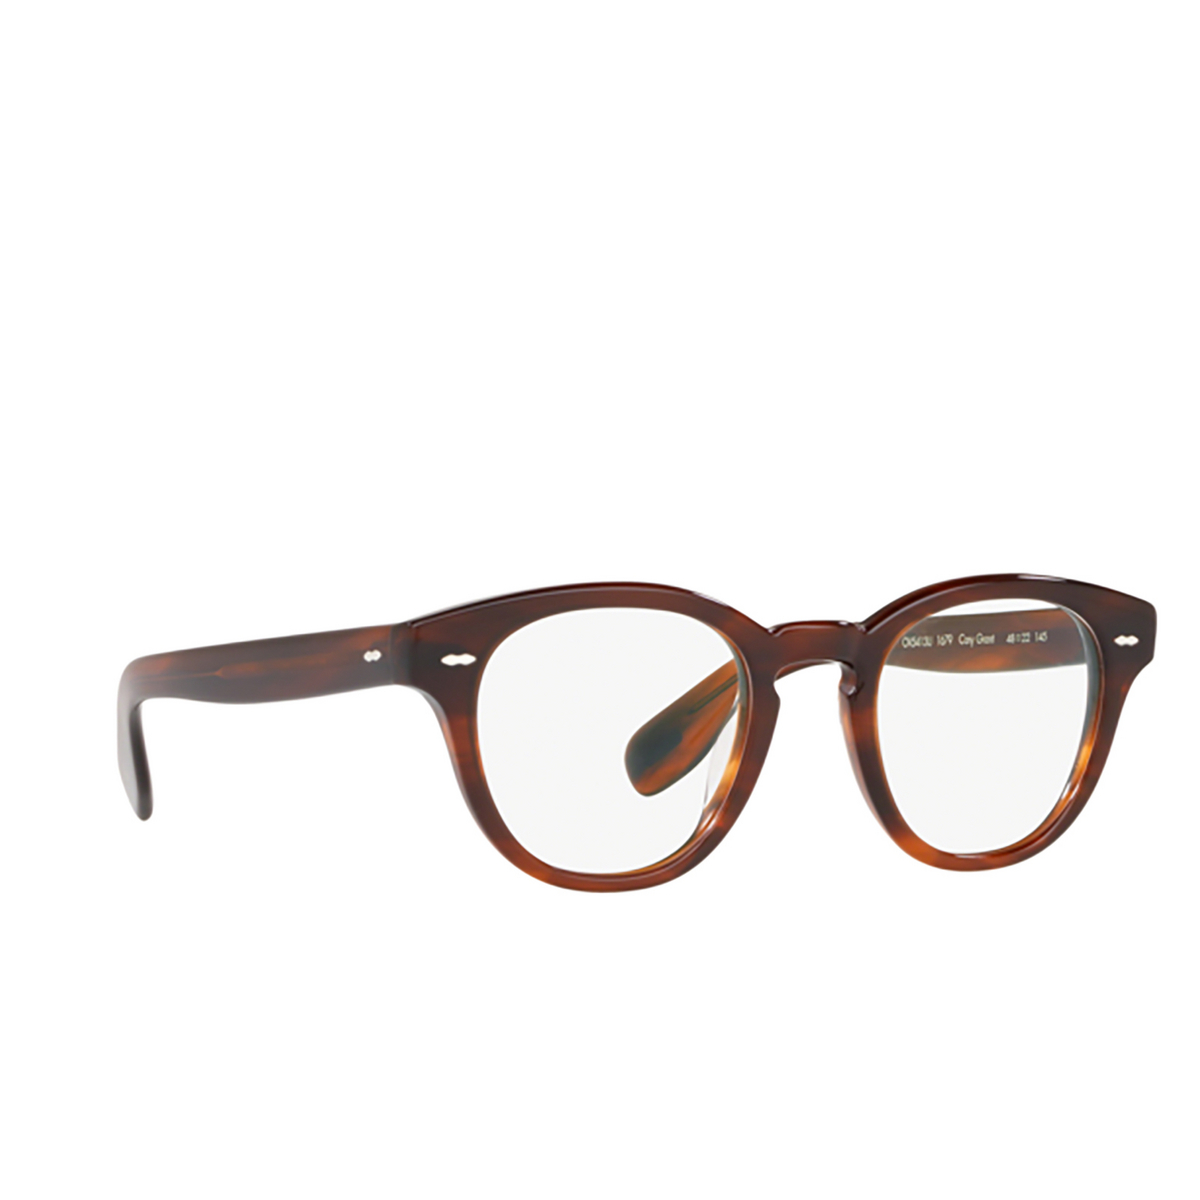 Oliver Peoples CARY GRANT Eyeglasses 1679 Grant Tortoise - three-quarters view